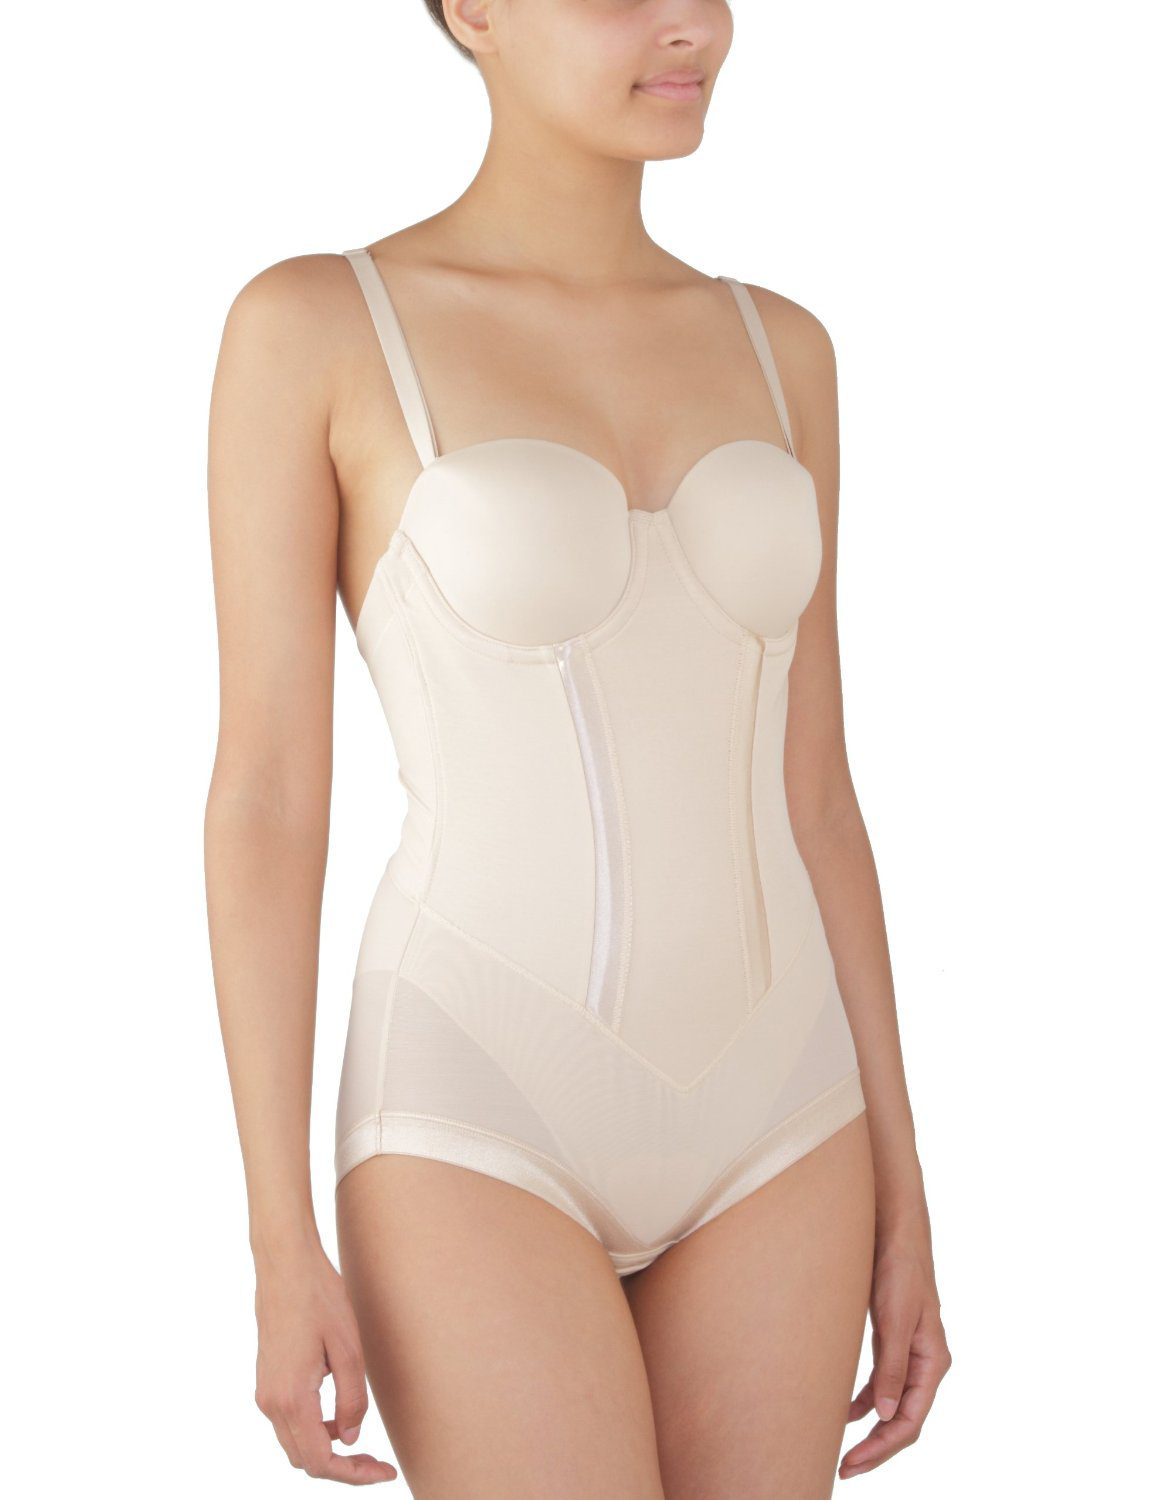 Flexees By Maidenform Womens Body Shaper With Built-In Bra & Anti